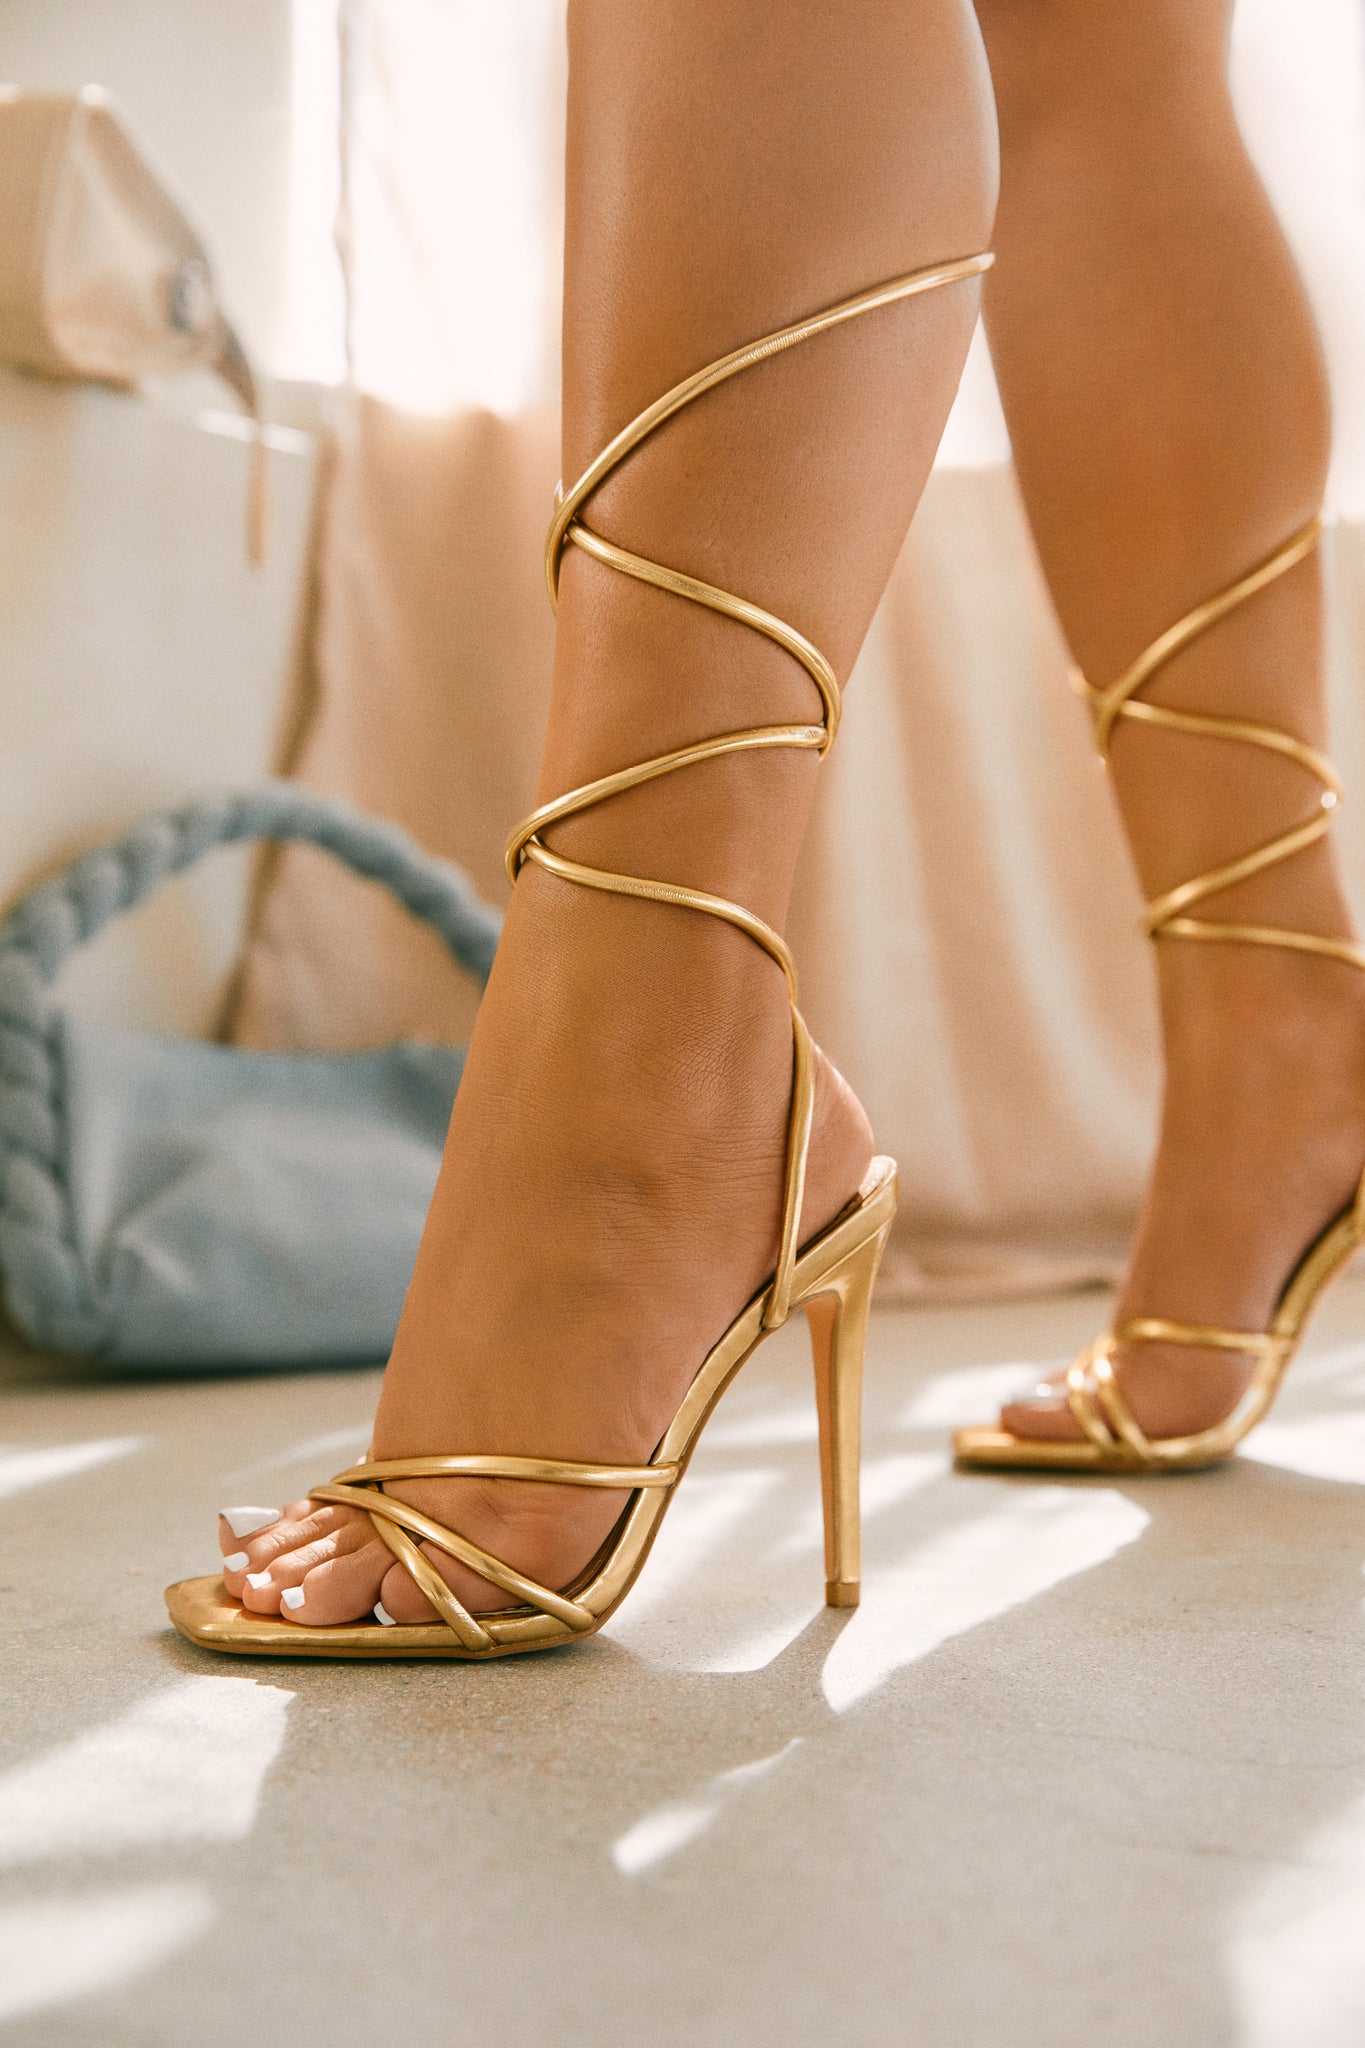 Heels that Fold to Flats - The Gold Publicist Pumps – VICE VERSA